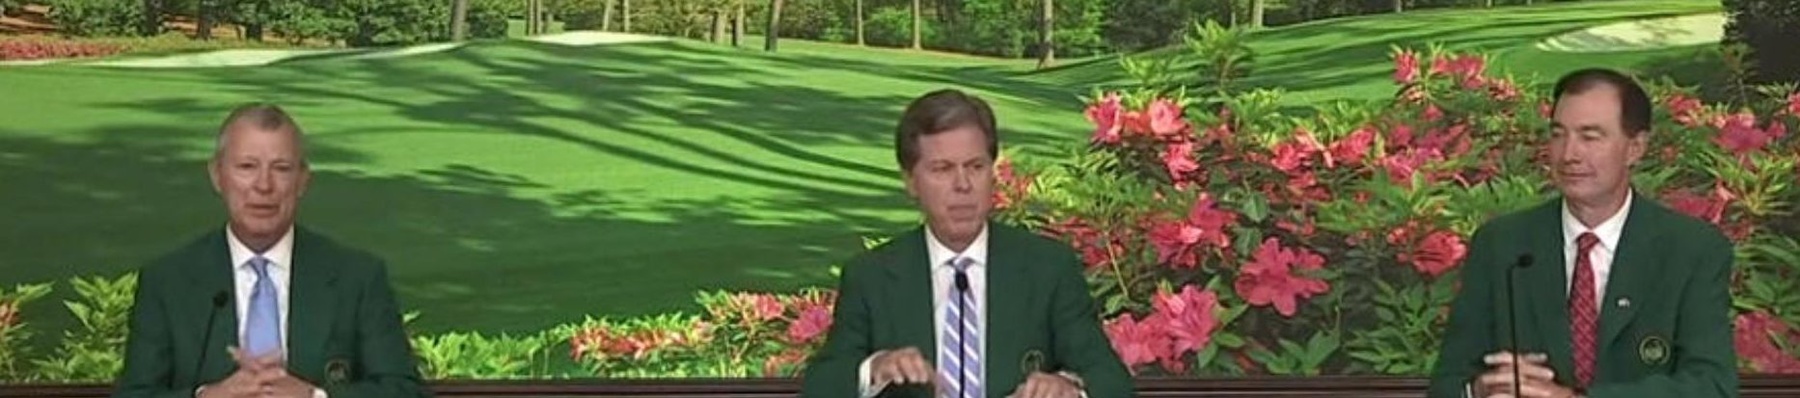 Augusta National Press Conferencemod